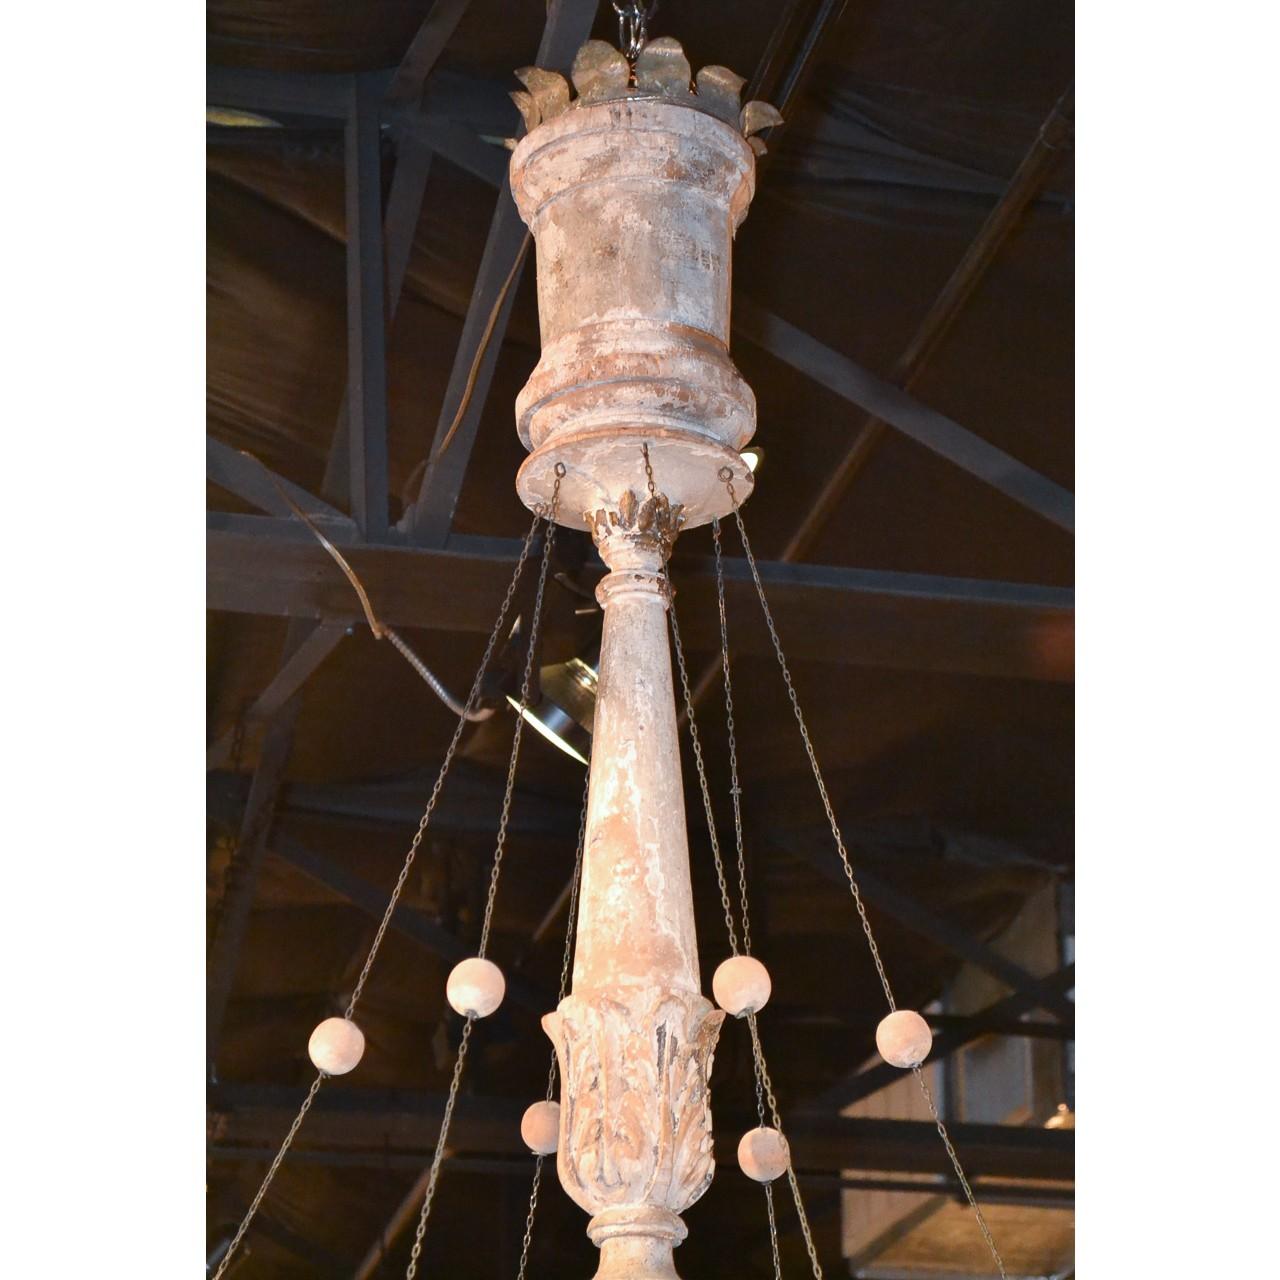 Splendid large-scale mid-19th century Italian iron and painted wood chandelier. The turned, shaped, and hand-carved stem surmounted with six double-loop iron branches holding carved candle cups. Wonderfully accented with strands of wood